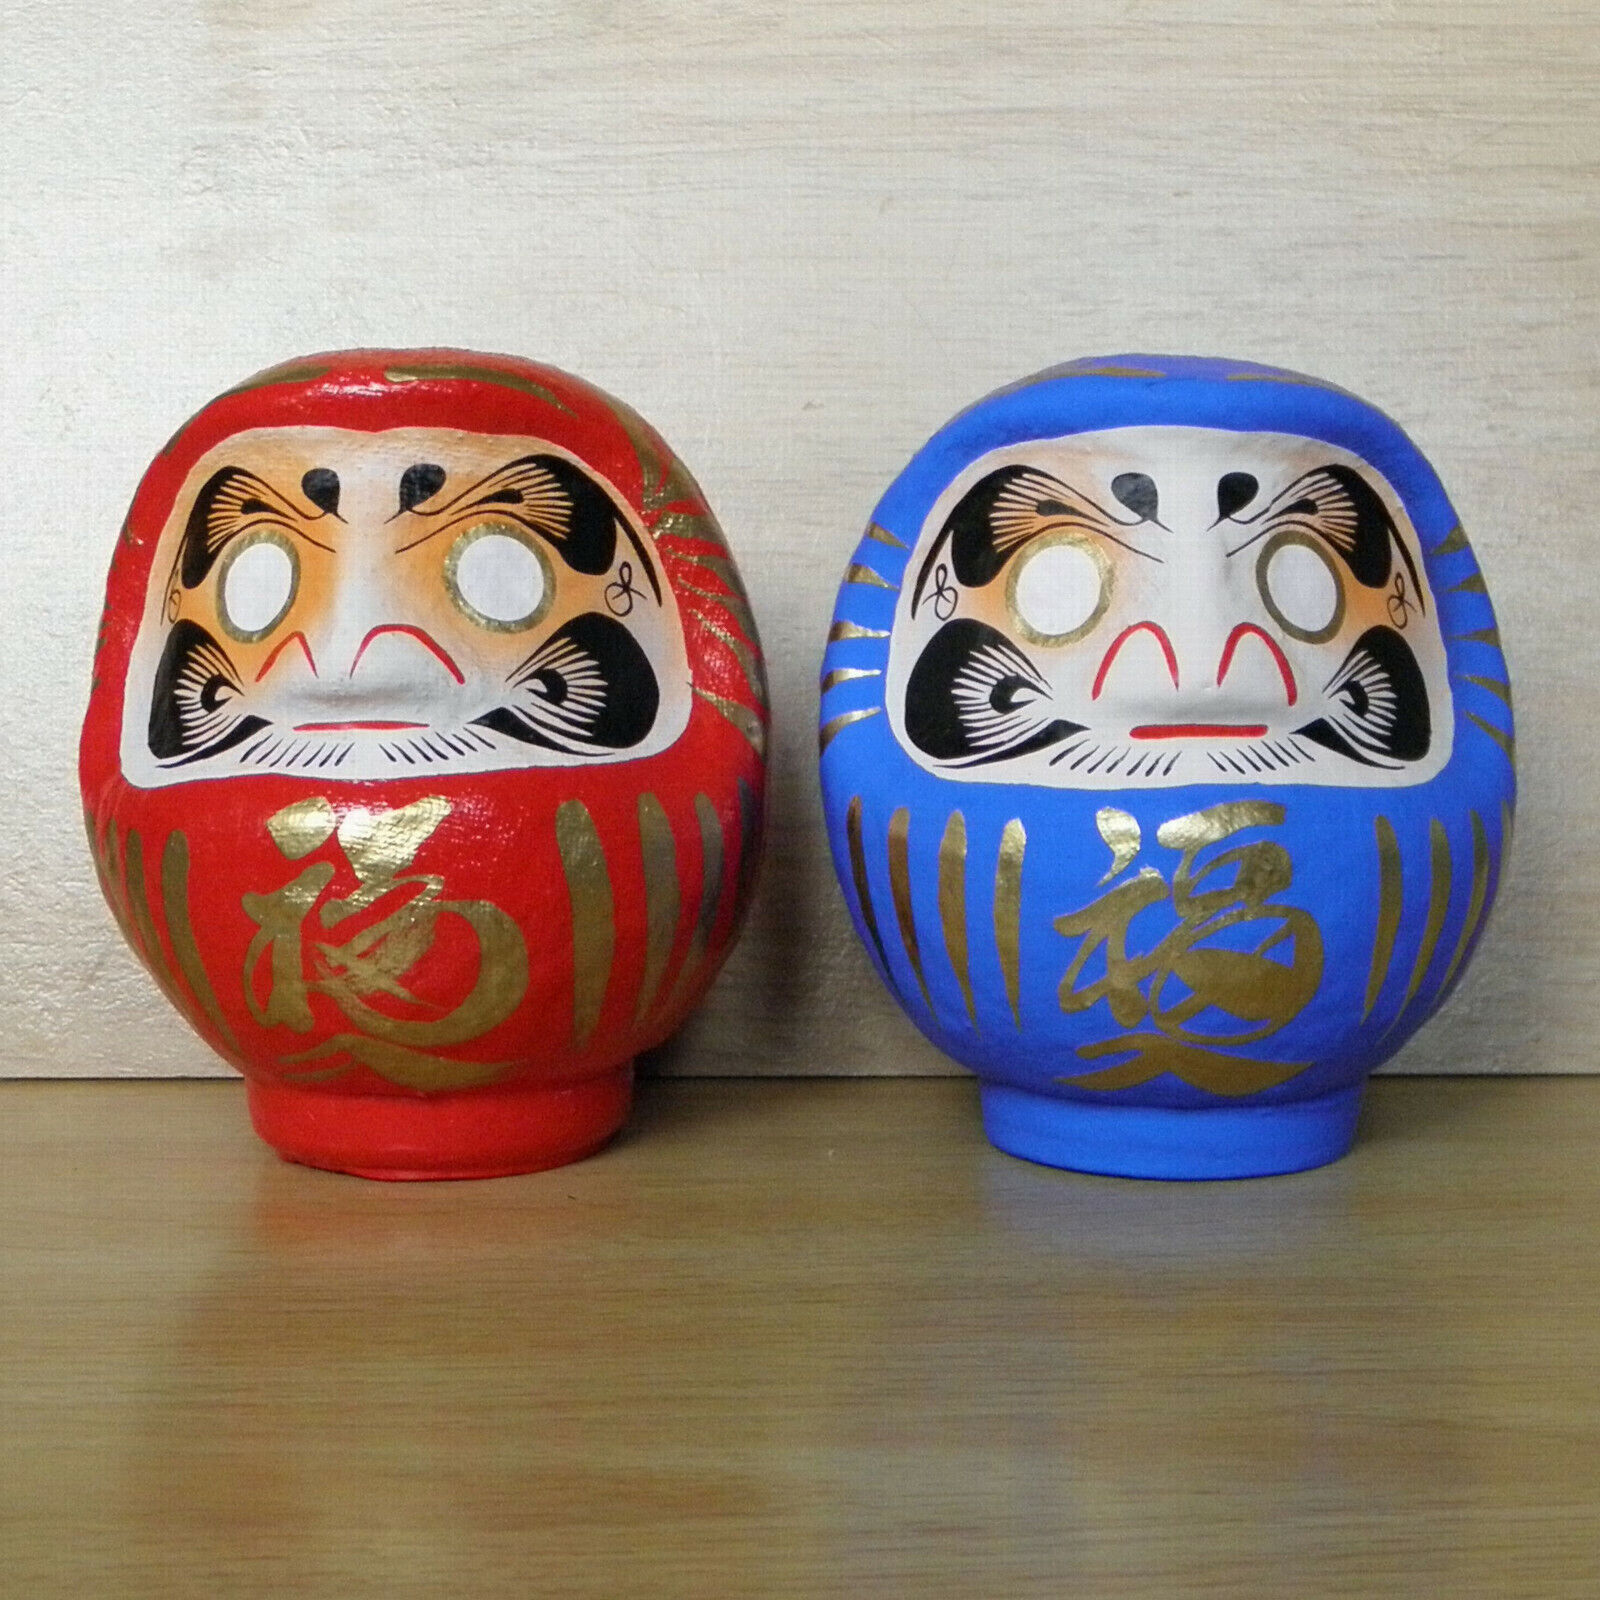 a pair of small Daruma Doll in red & blue colors : No 1 size with a marker pen